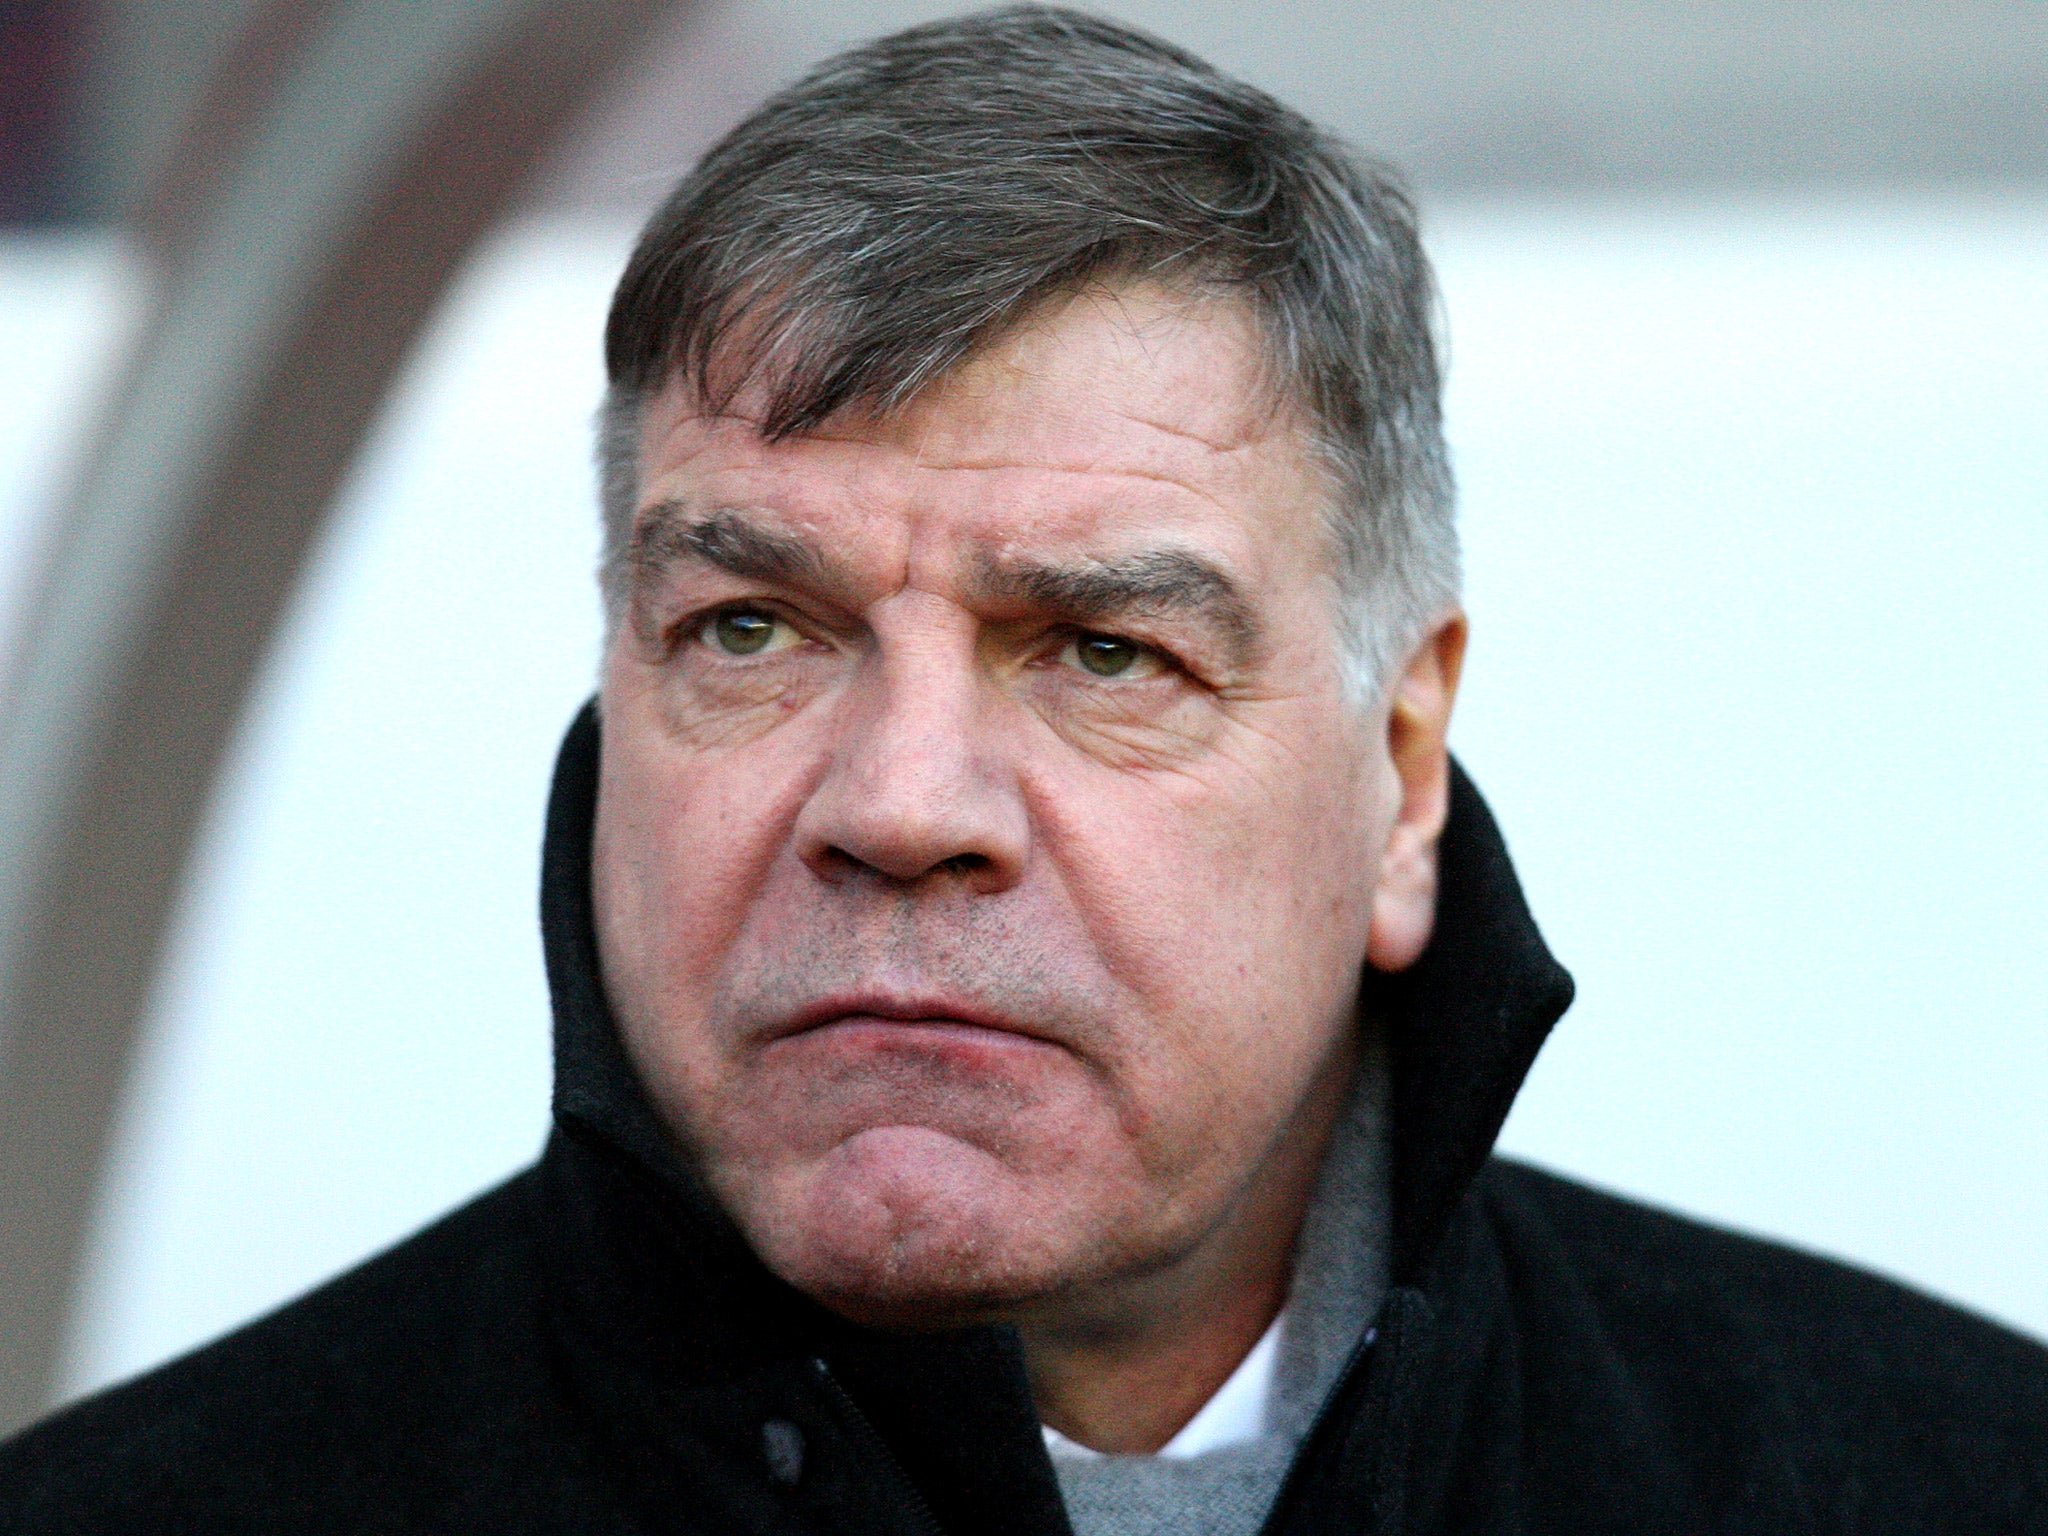 West Ham boss Sam Allardyce thinks his squad has made “massive progress” in a short period of time